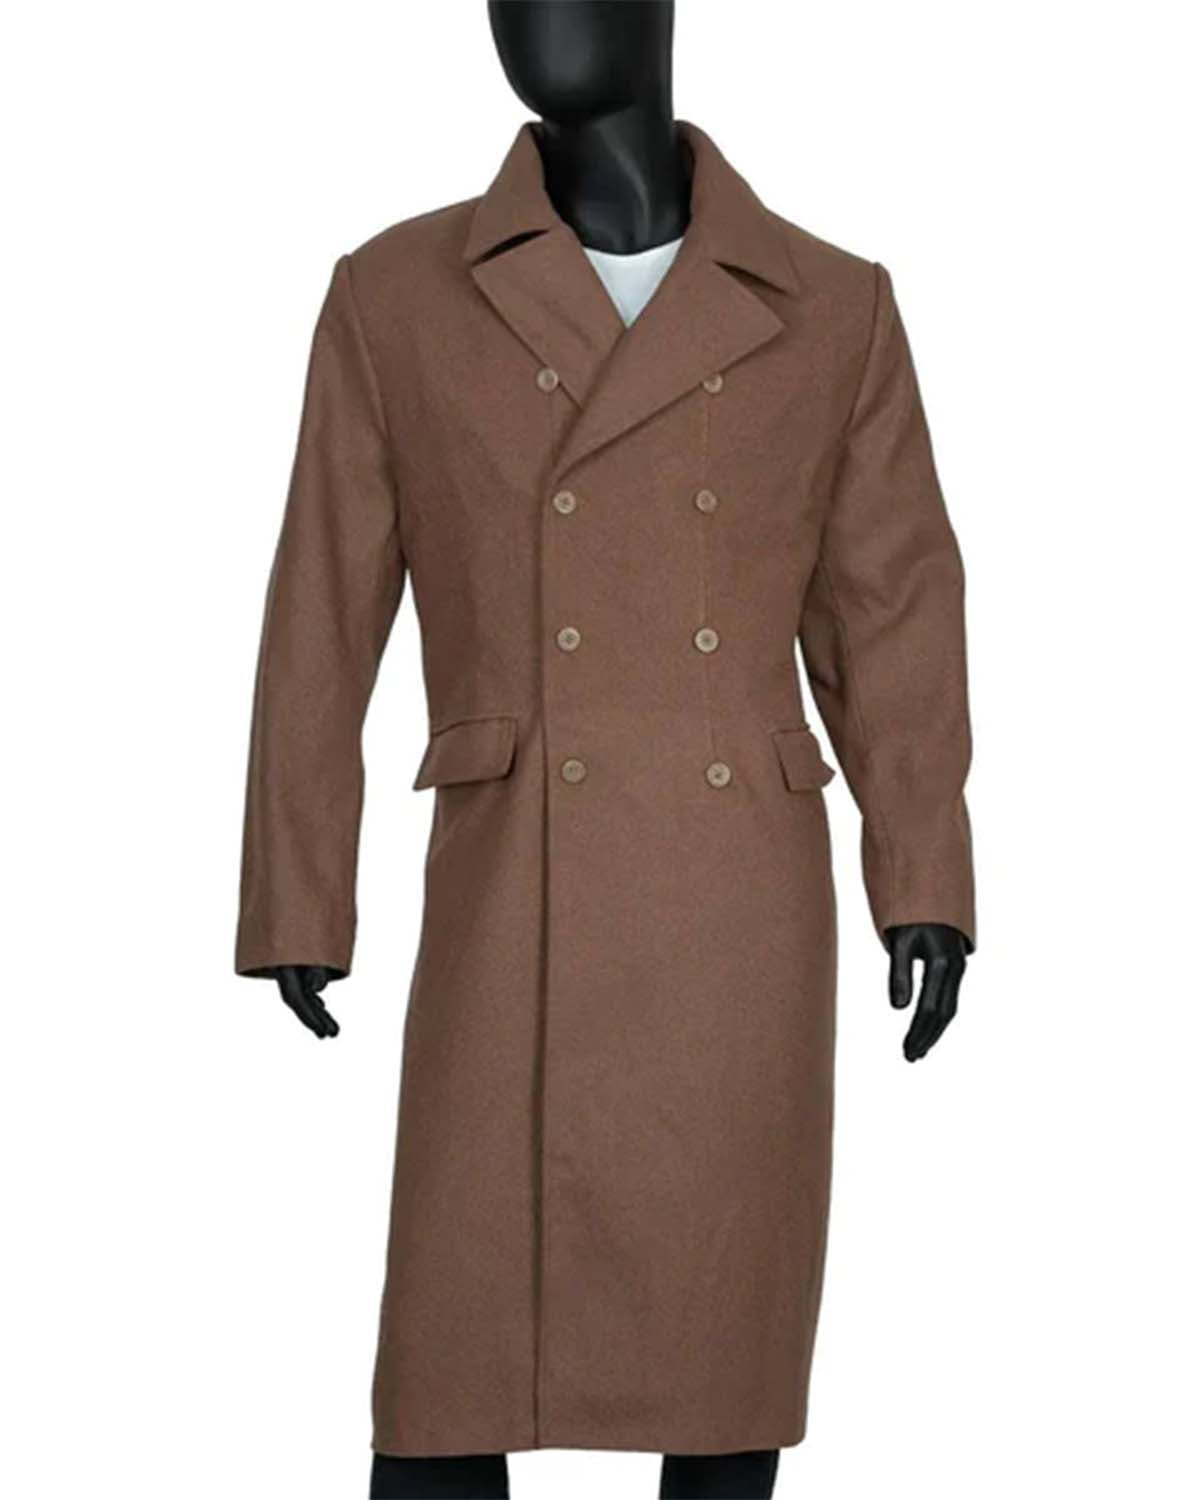 Elite Doctor Who 10th Doctor Trench Coat